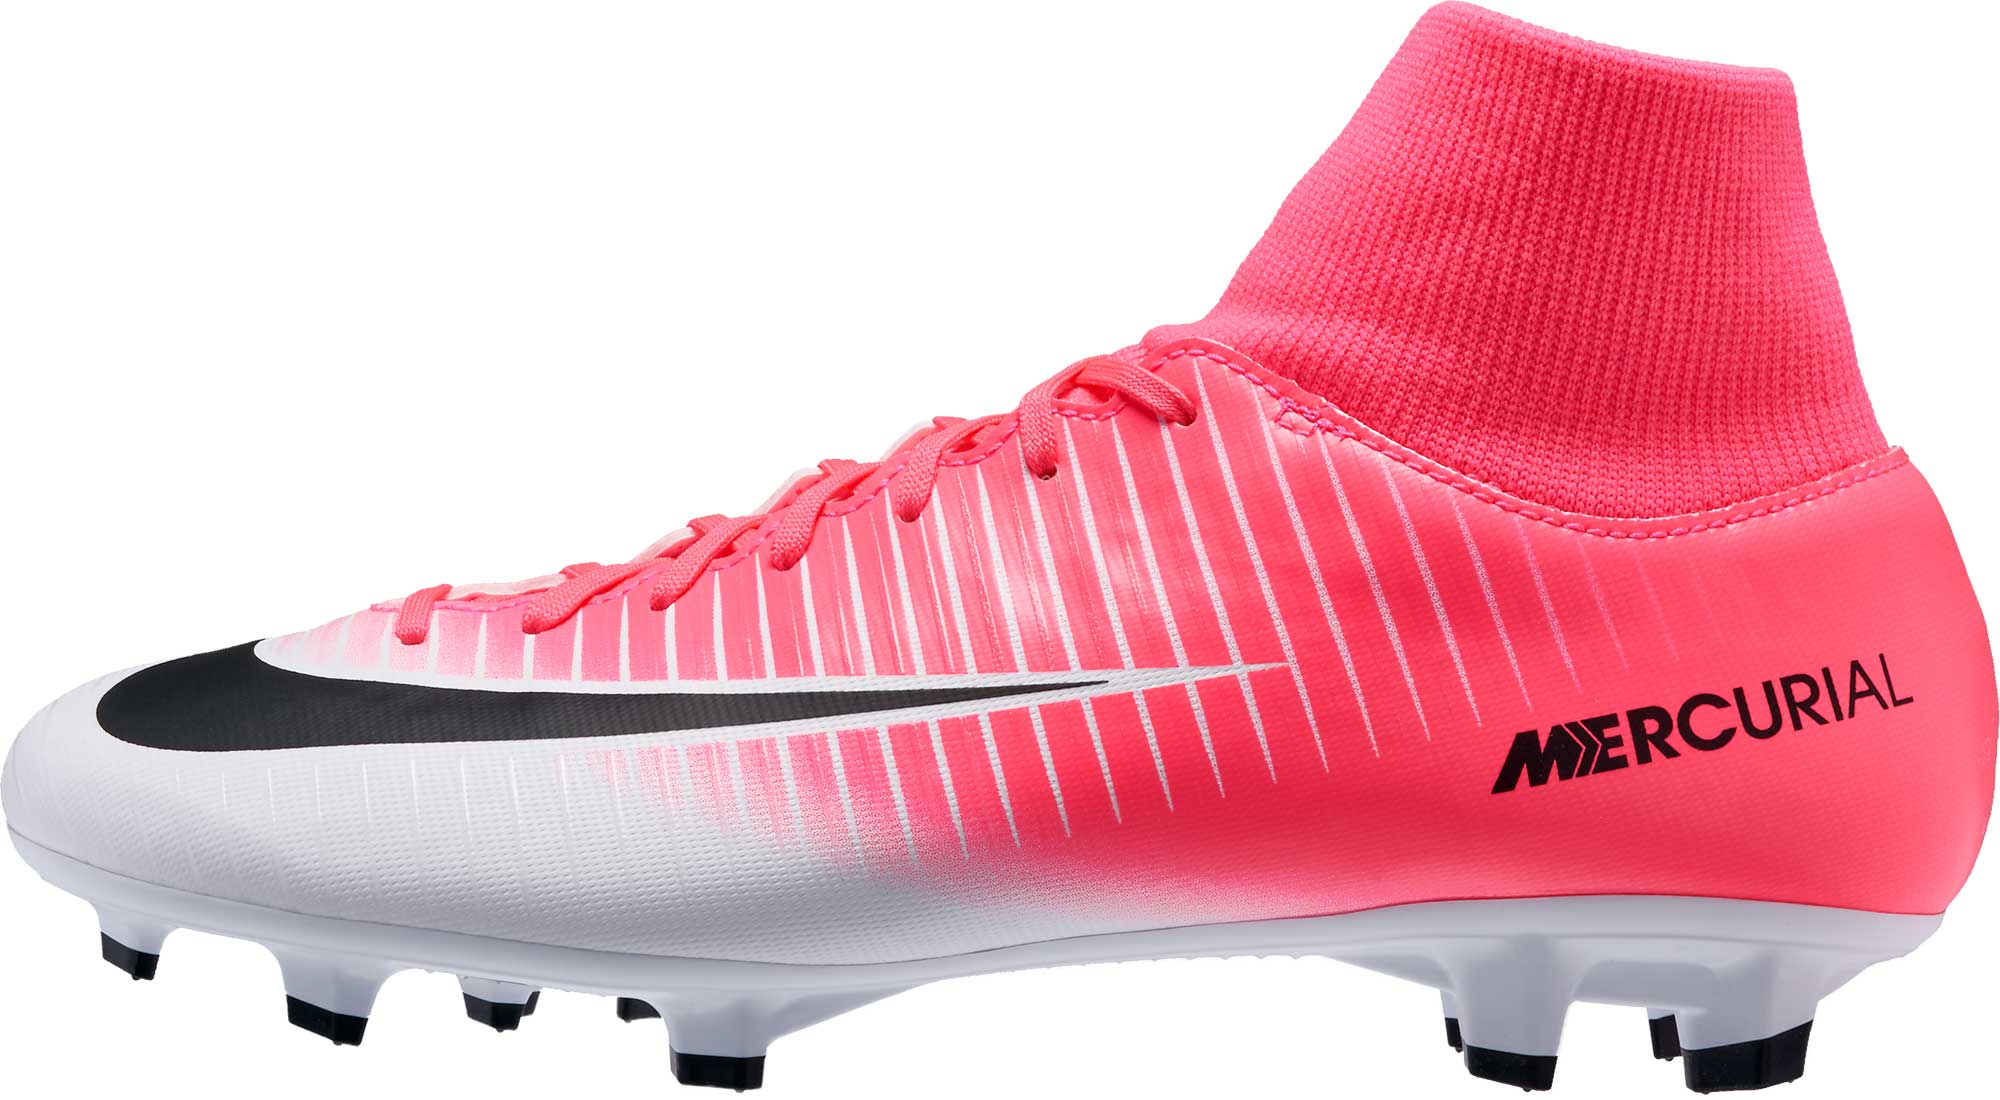 mercurial pink boots